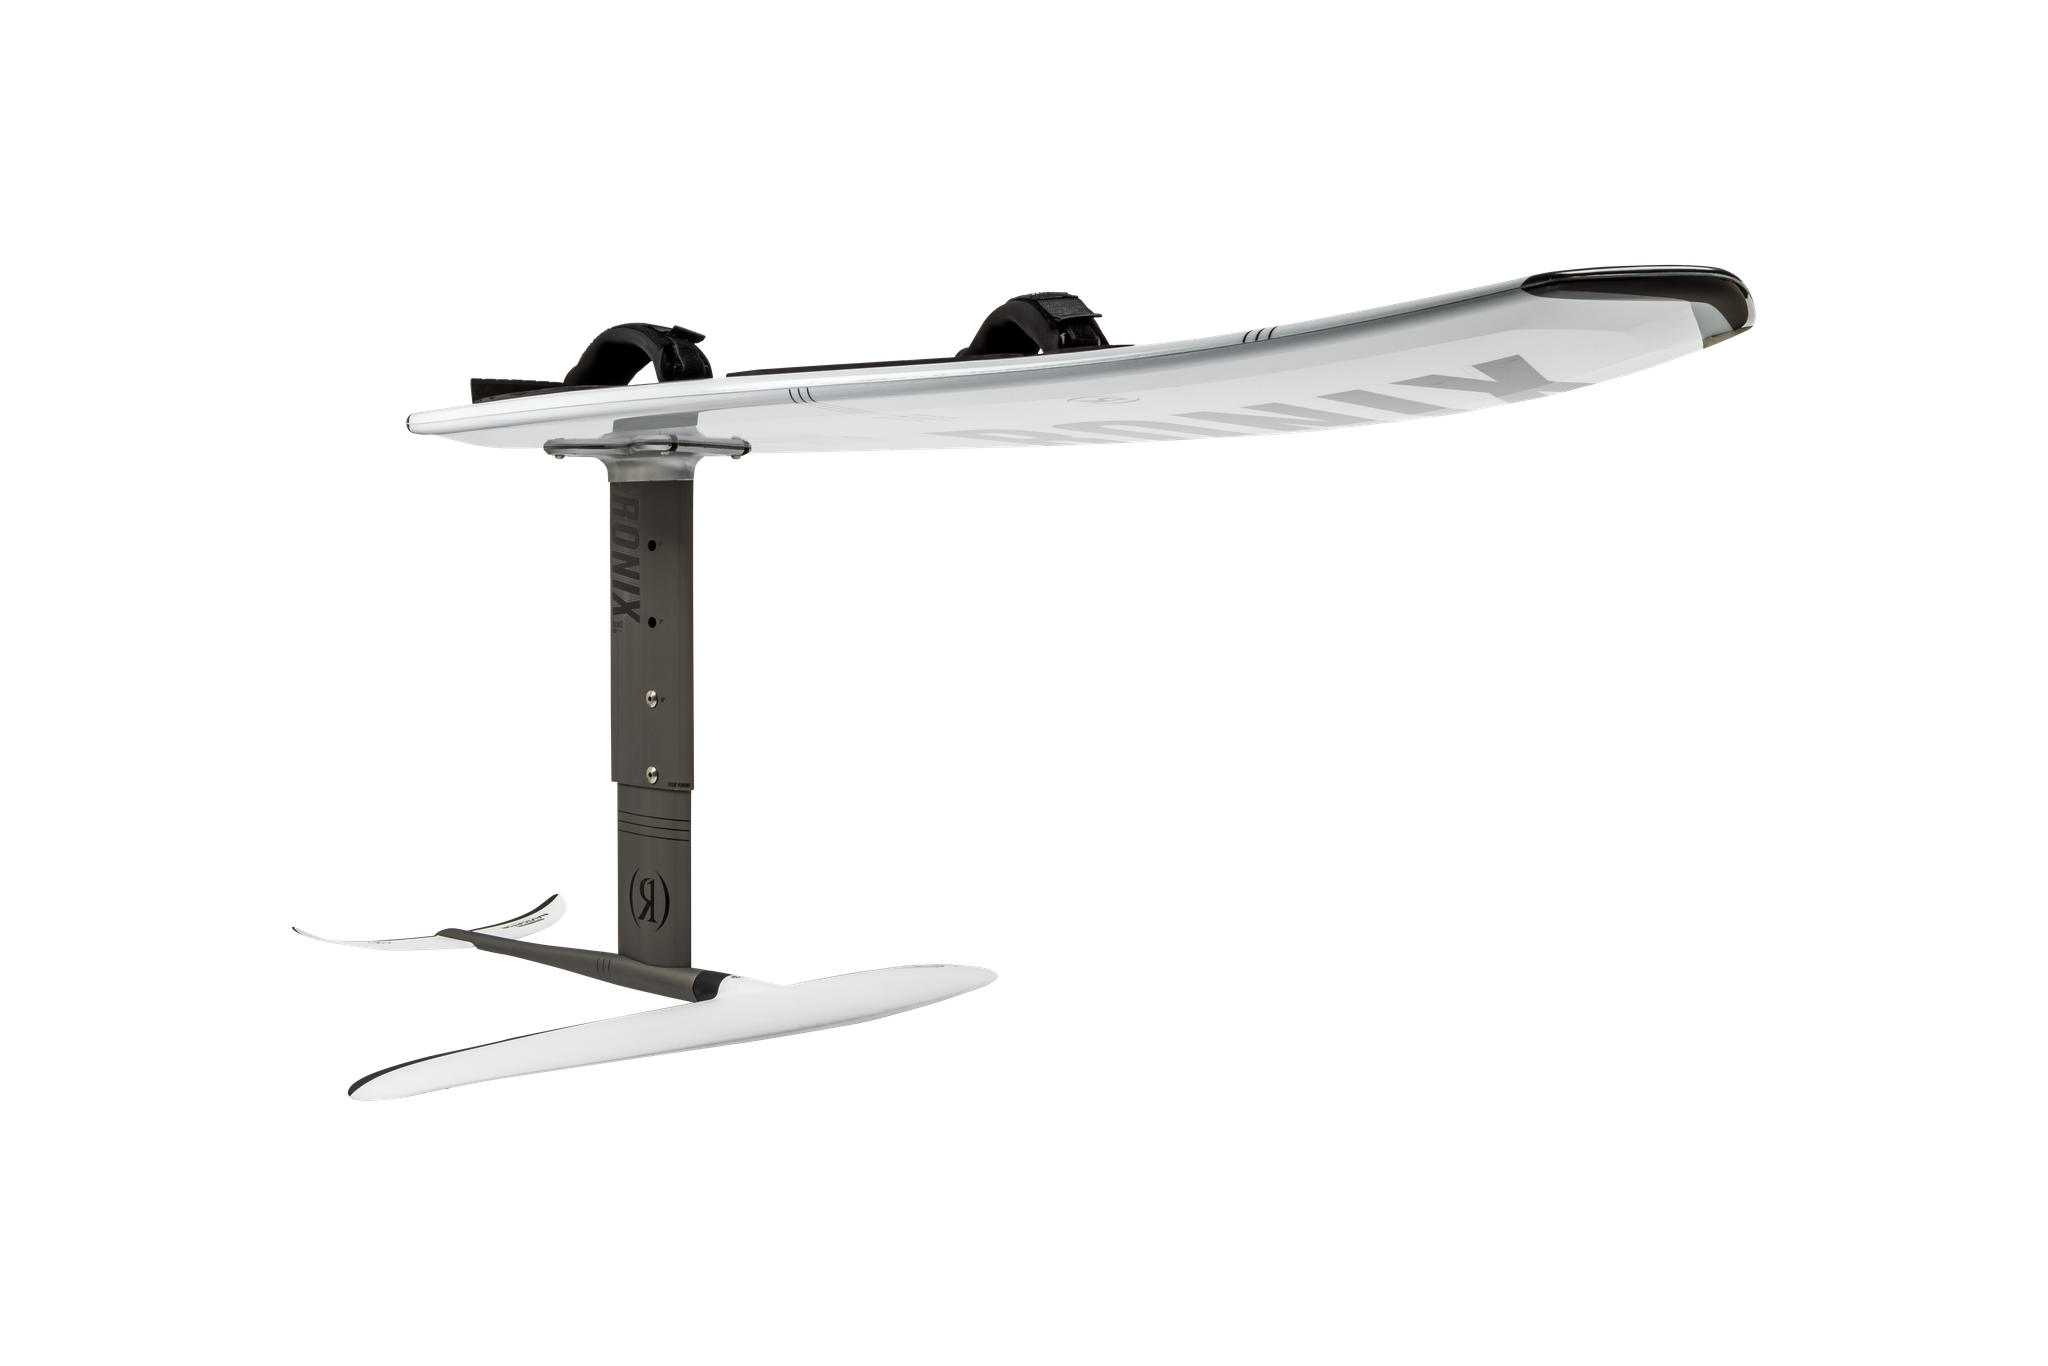 A Ronix Koal Surface 727 Foil | Beginner-Intermediate Hybrid Series surfboard with a front wing, sitting on top of a black background.